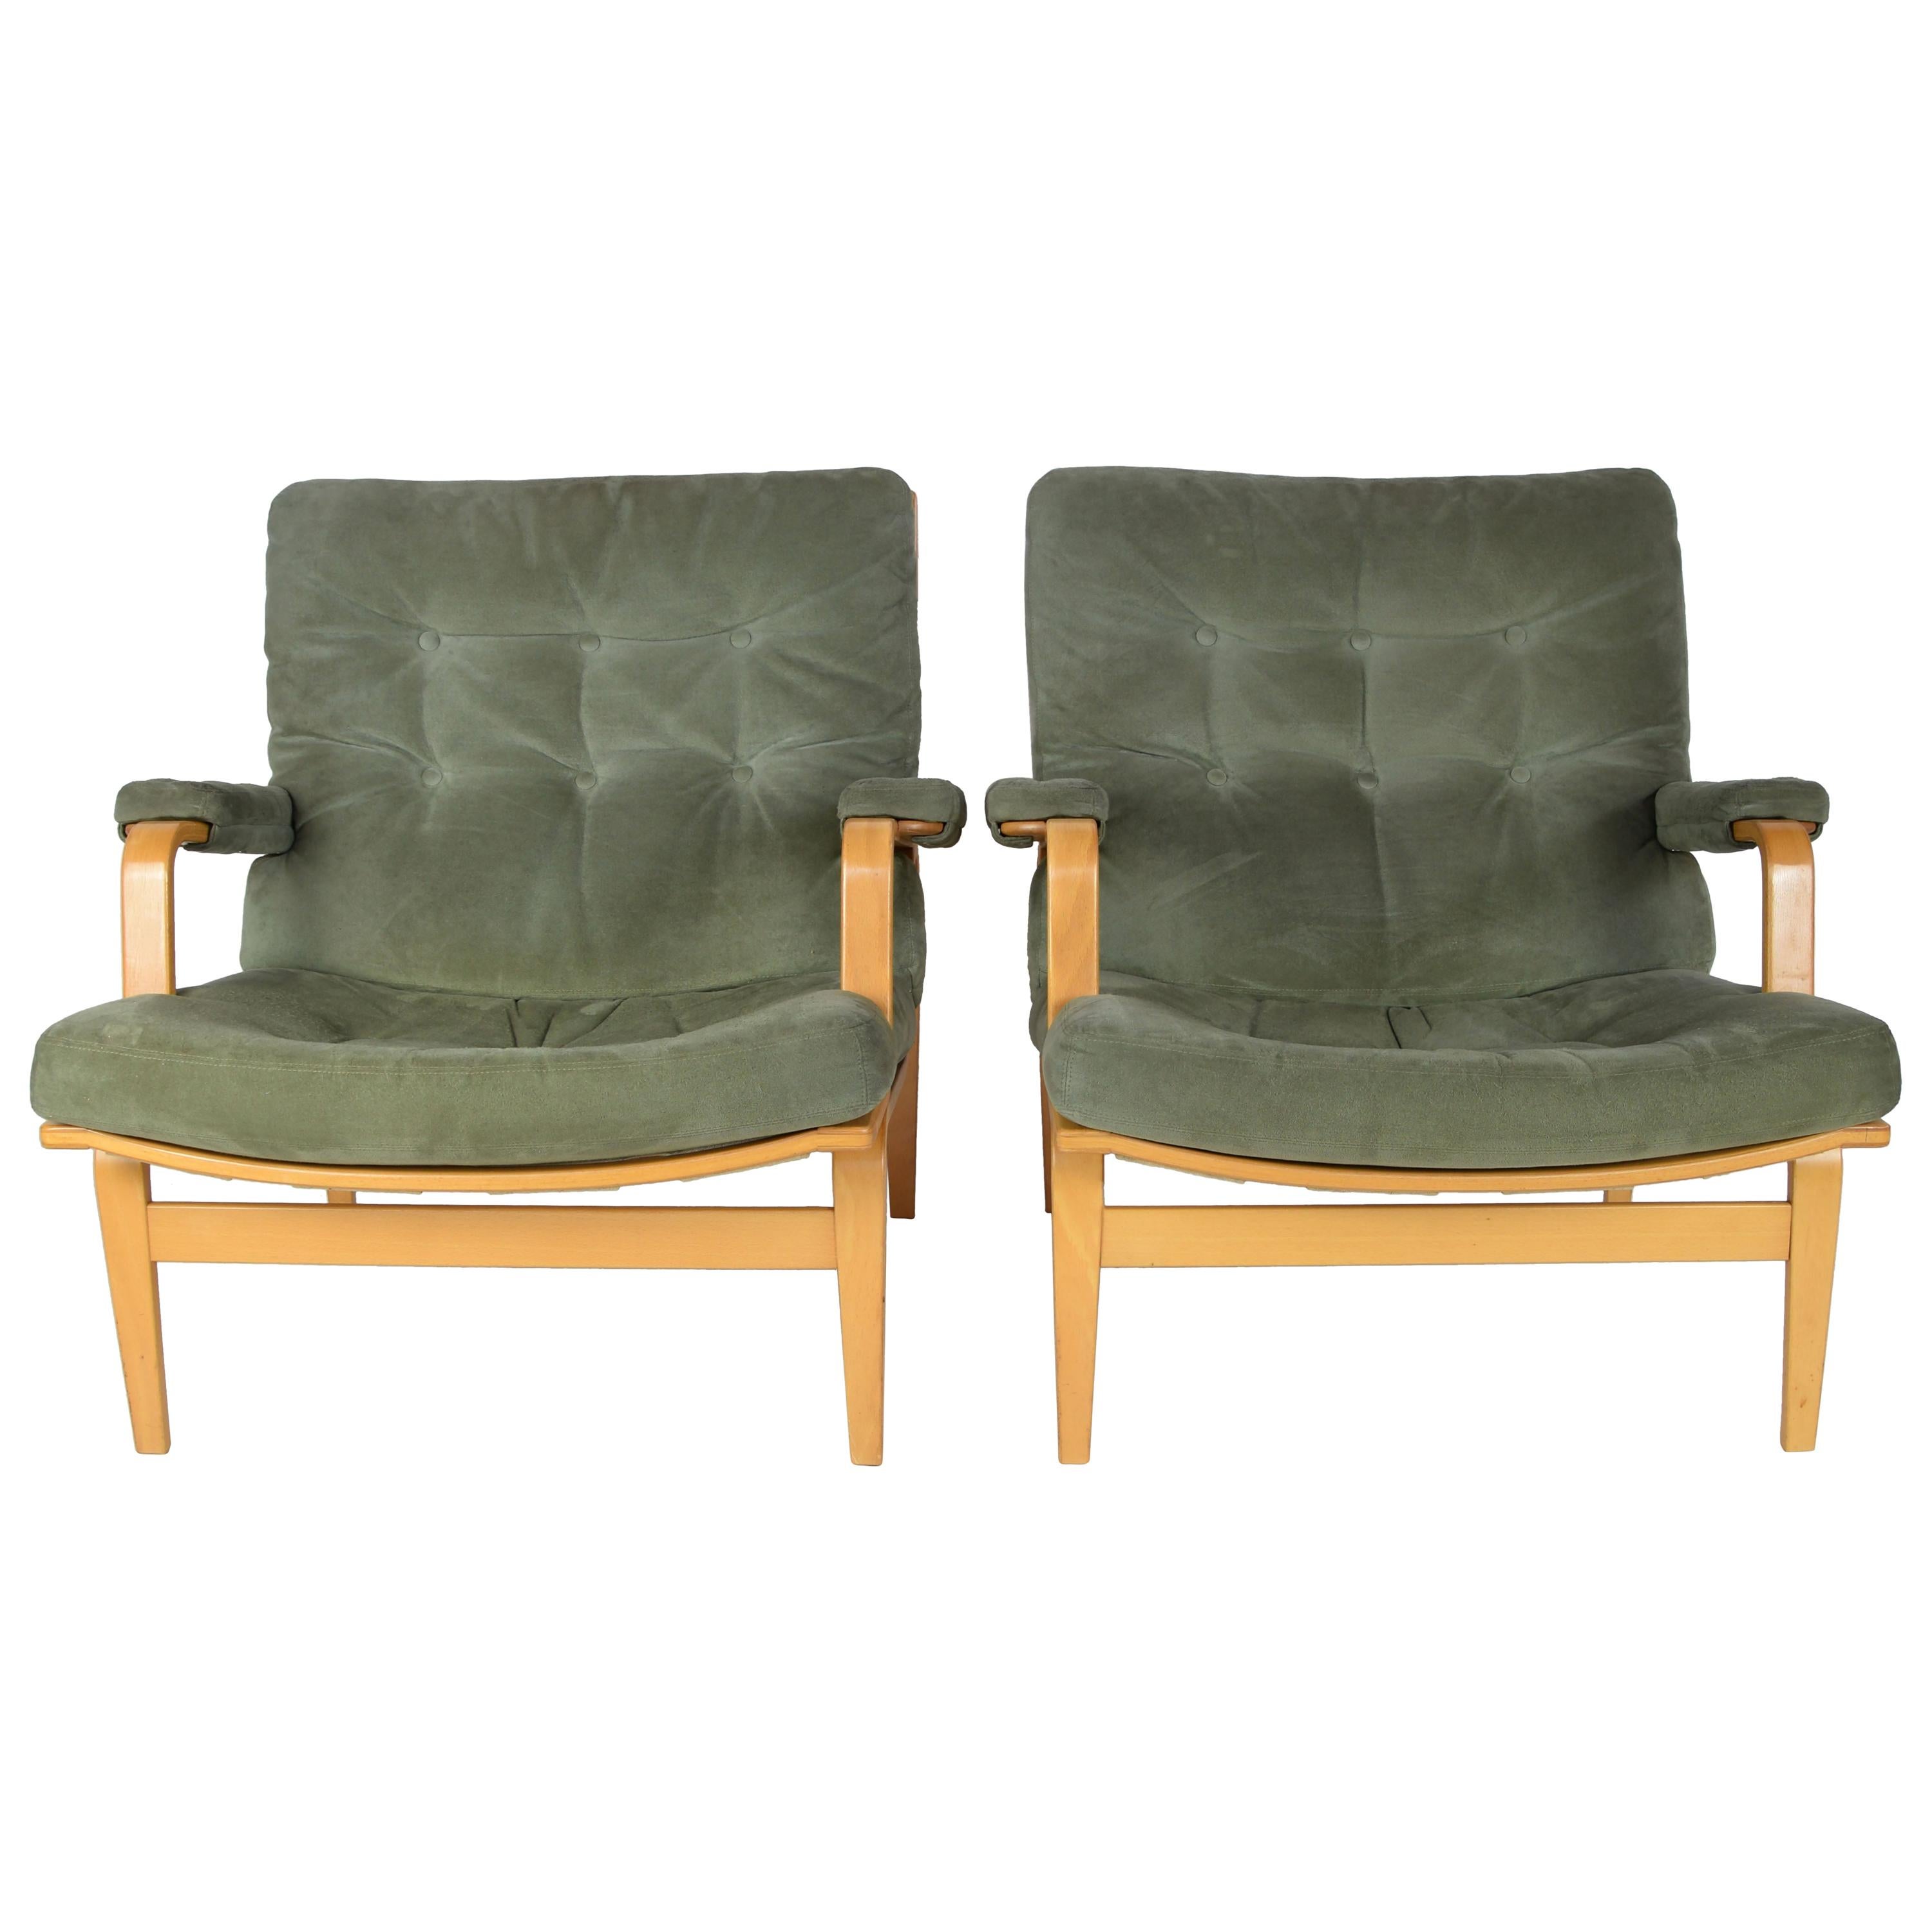 Pair of Bruno Mathssons Ingrid Lounge chairs, Sweden, 1970s For Sale